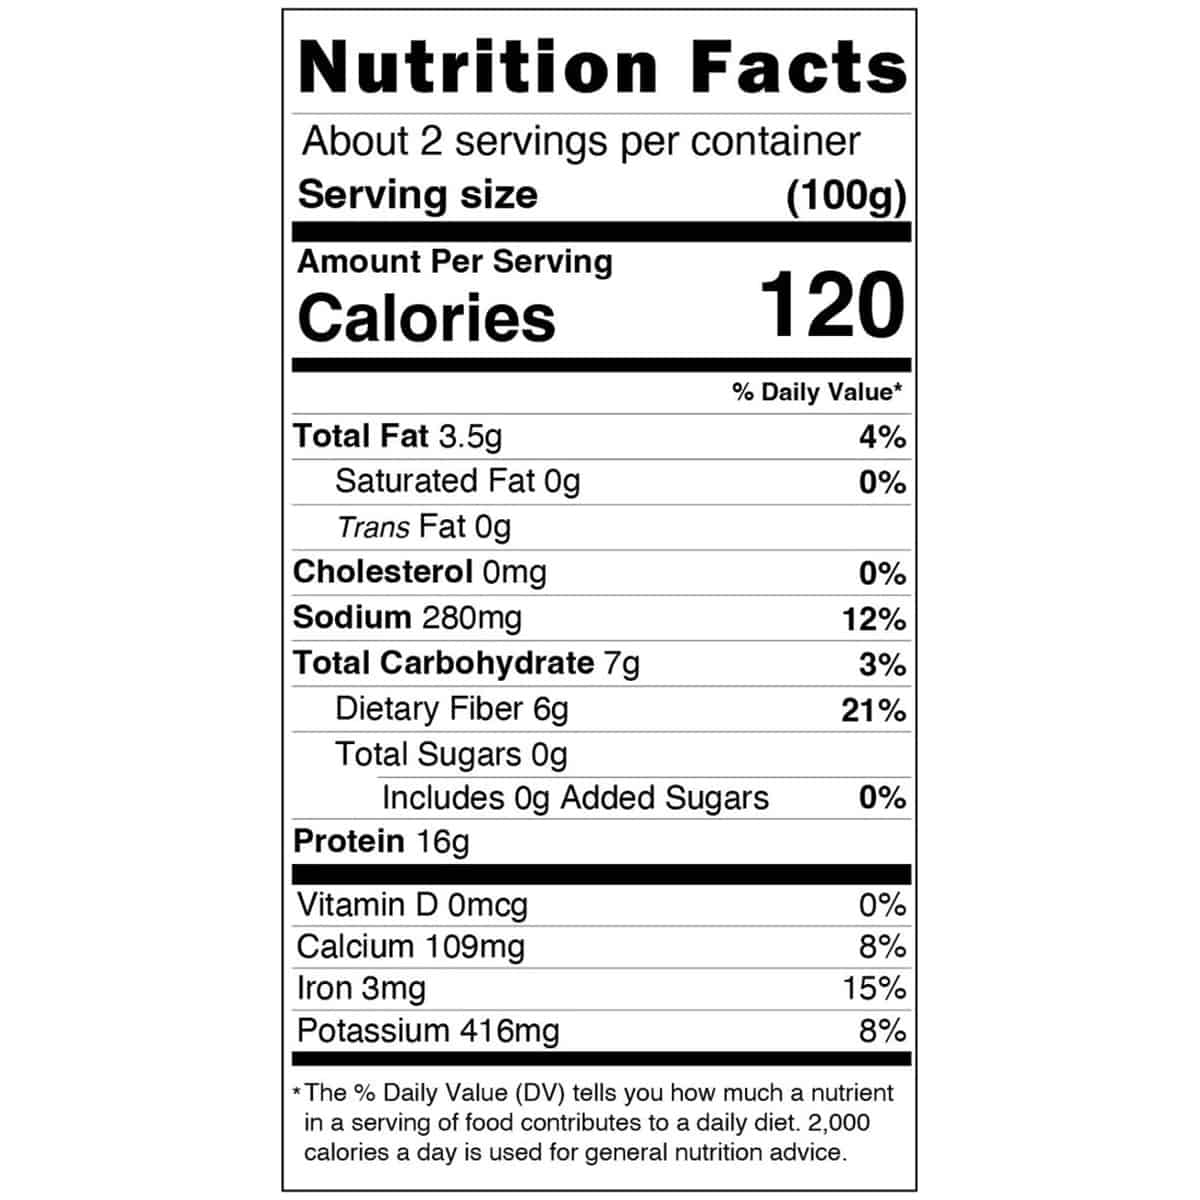 Nutrition facts panel